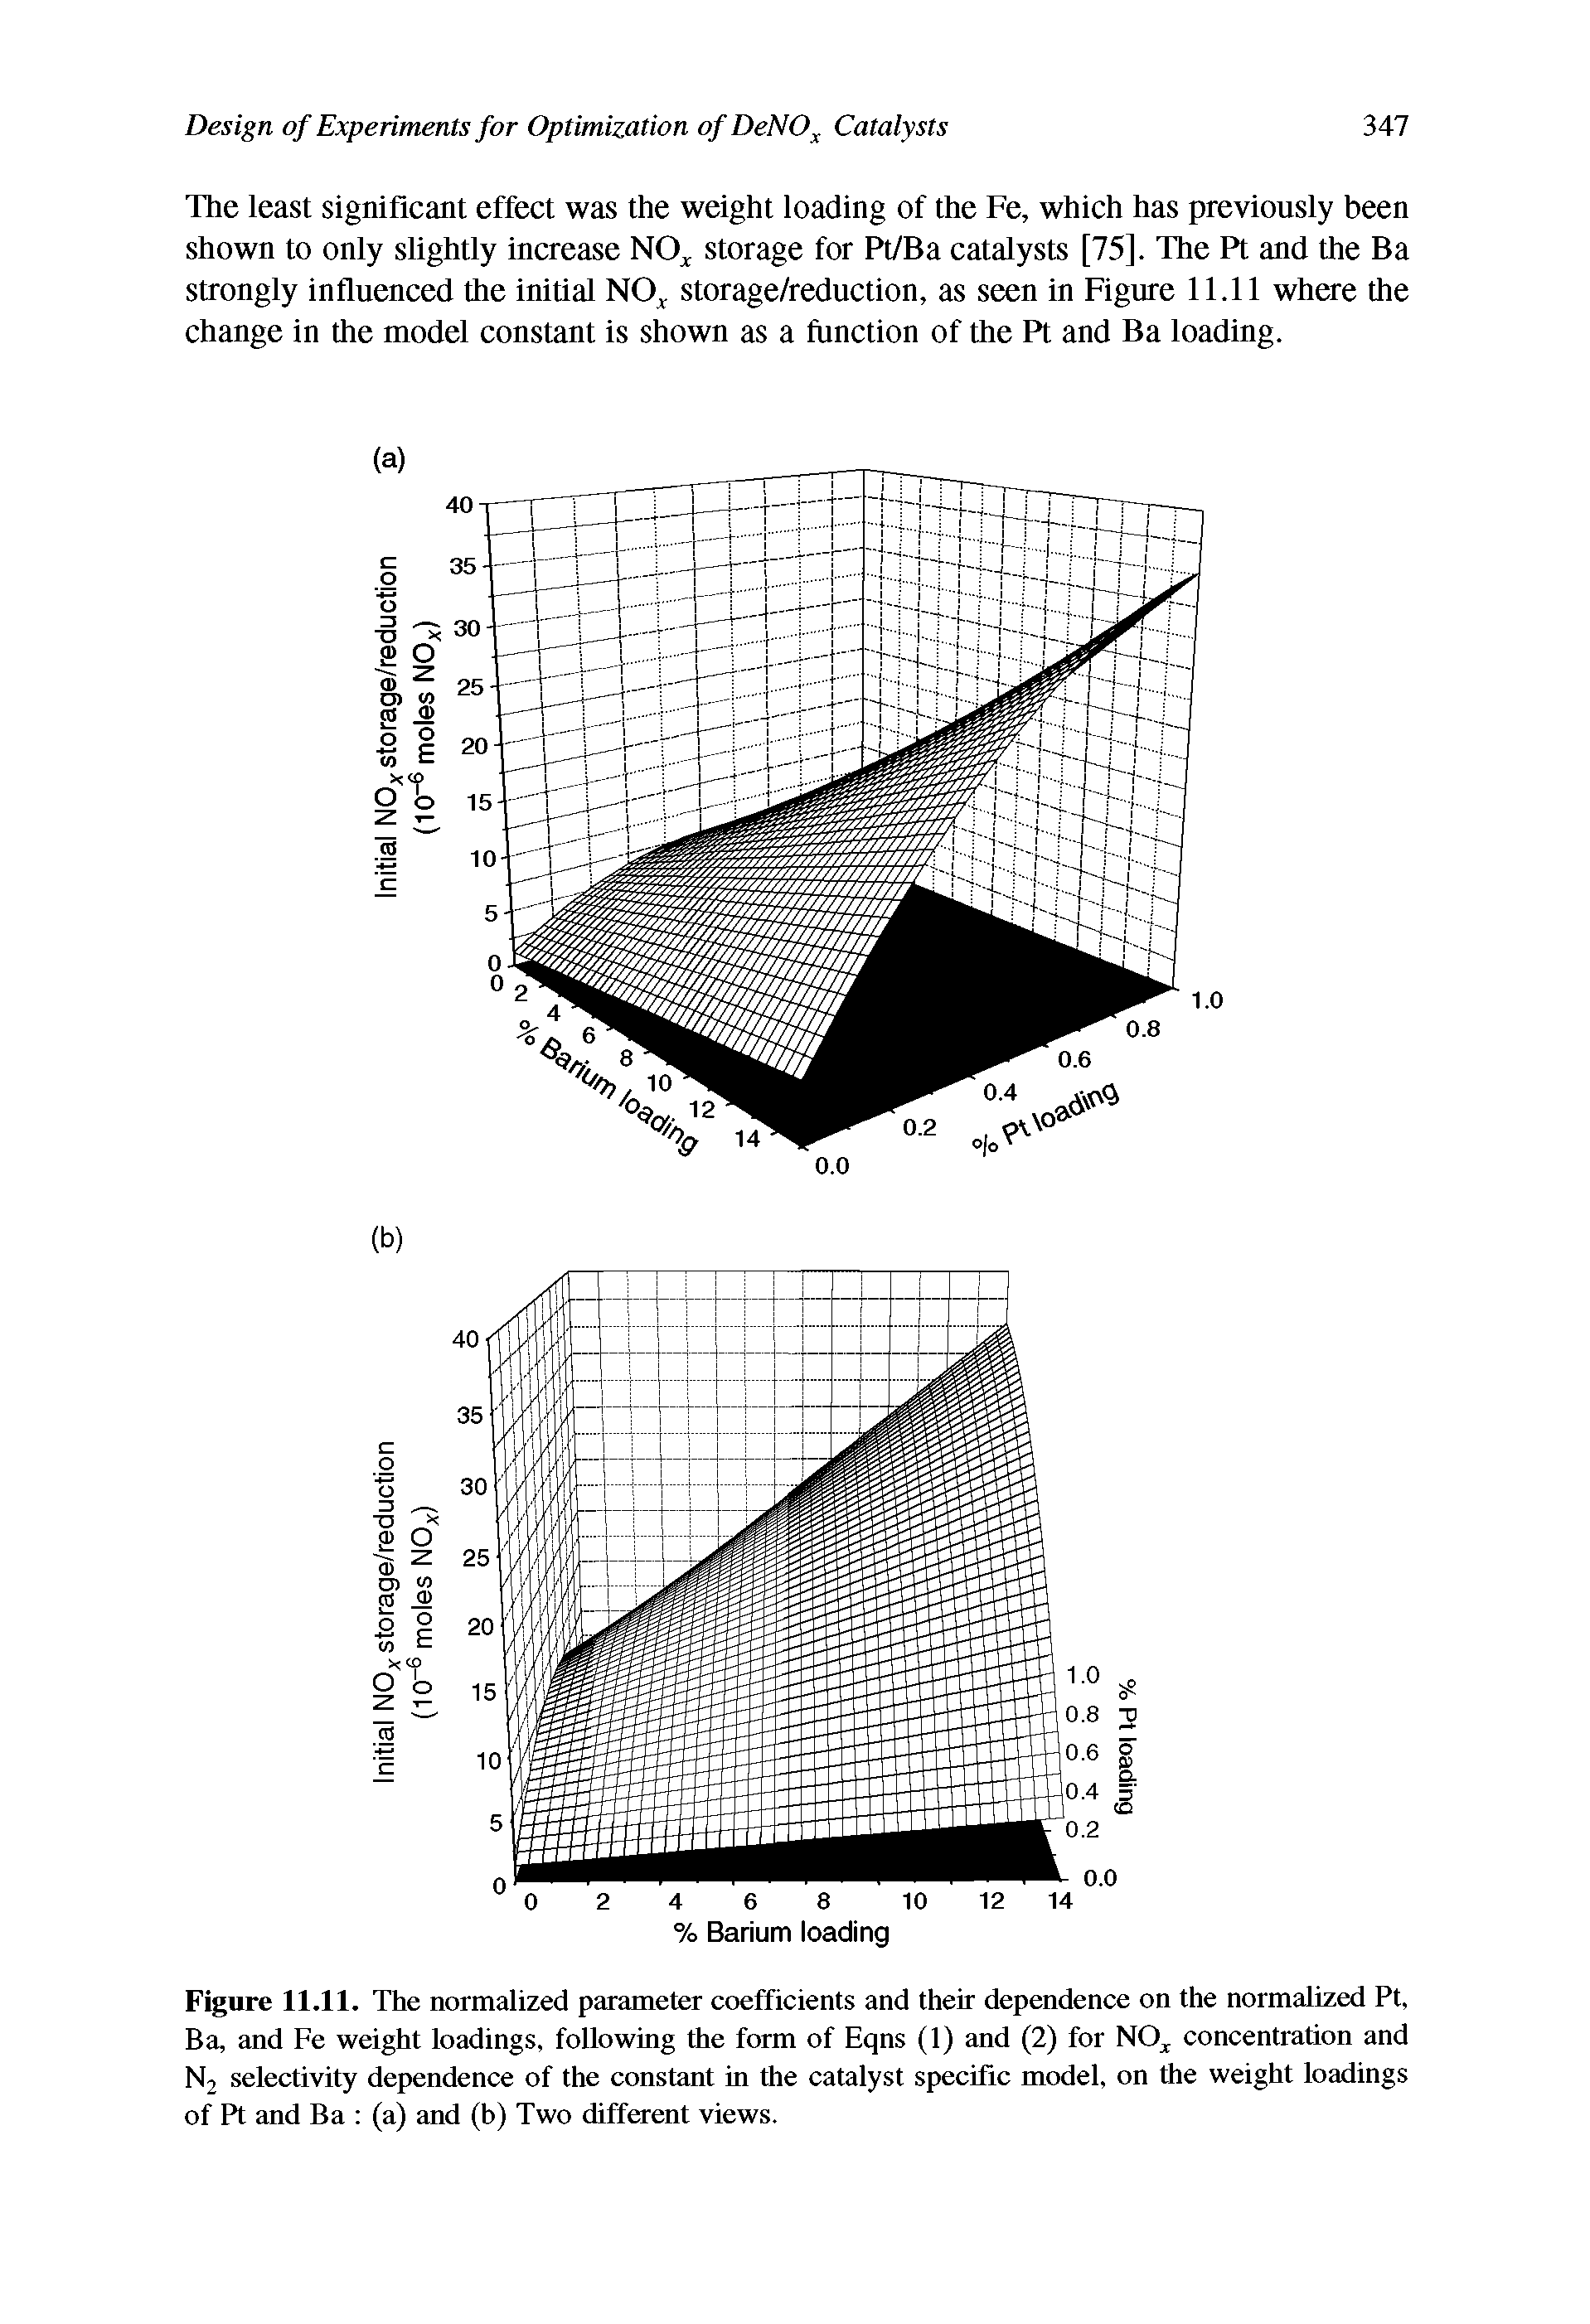 Figure 11.11. The normalized parameter coefficients and their dependence on the normalized Pt, Ba, and Fe weight loadings, following the form of Eqns (1) and (2) for NO, concentration and N2 selectivity dependence of the constant in the catalyst specific model, on the weight loadings of Pt and Ba (a) and (b) Two different views.